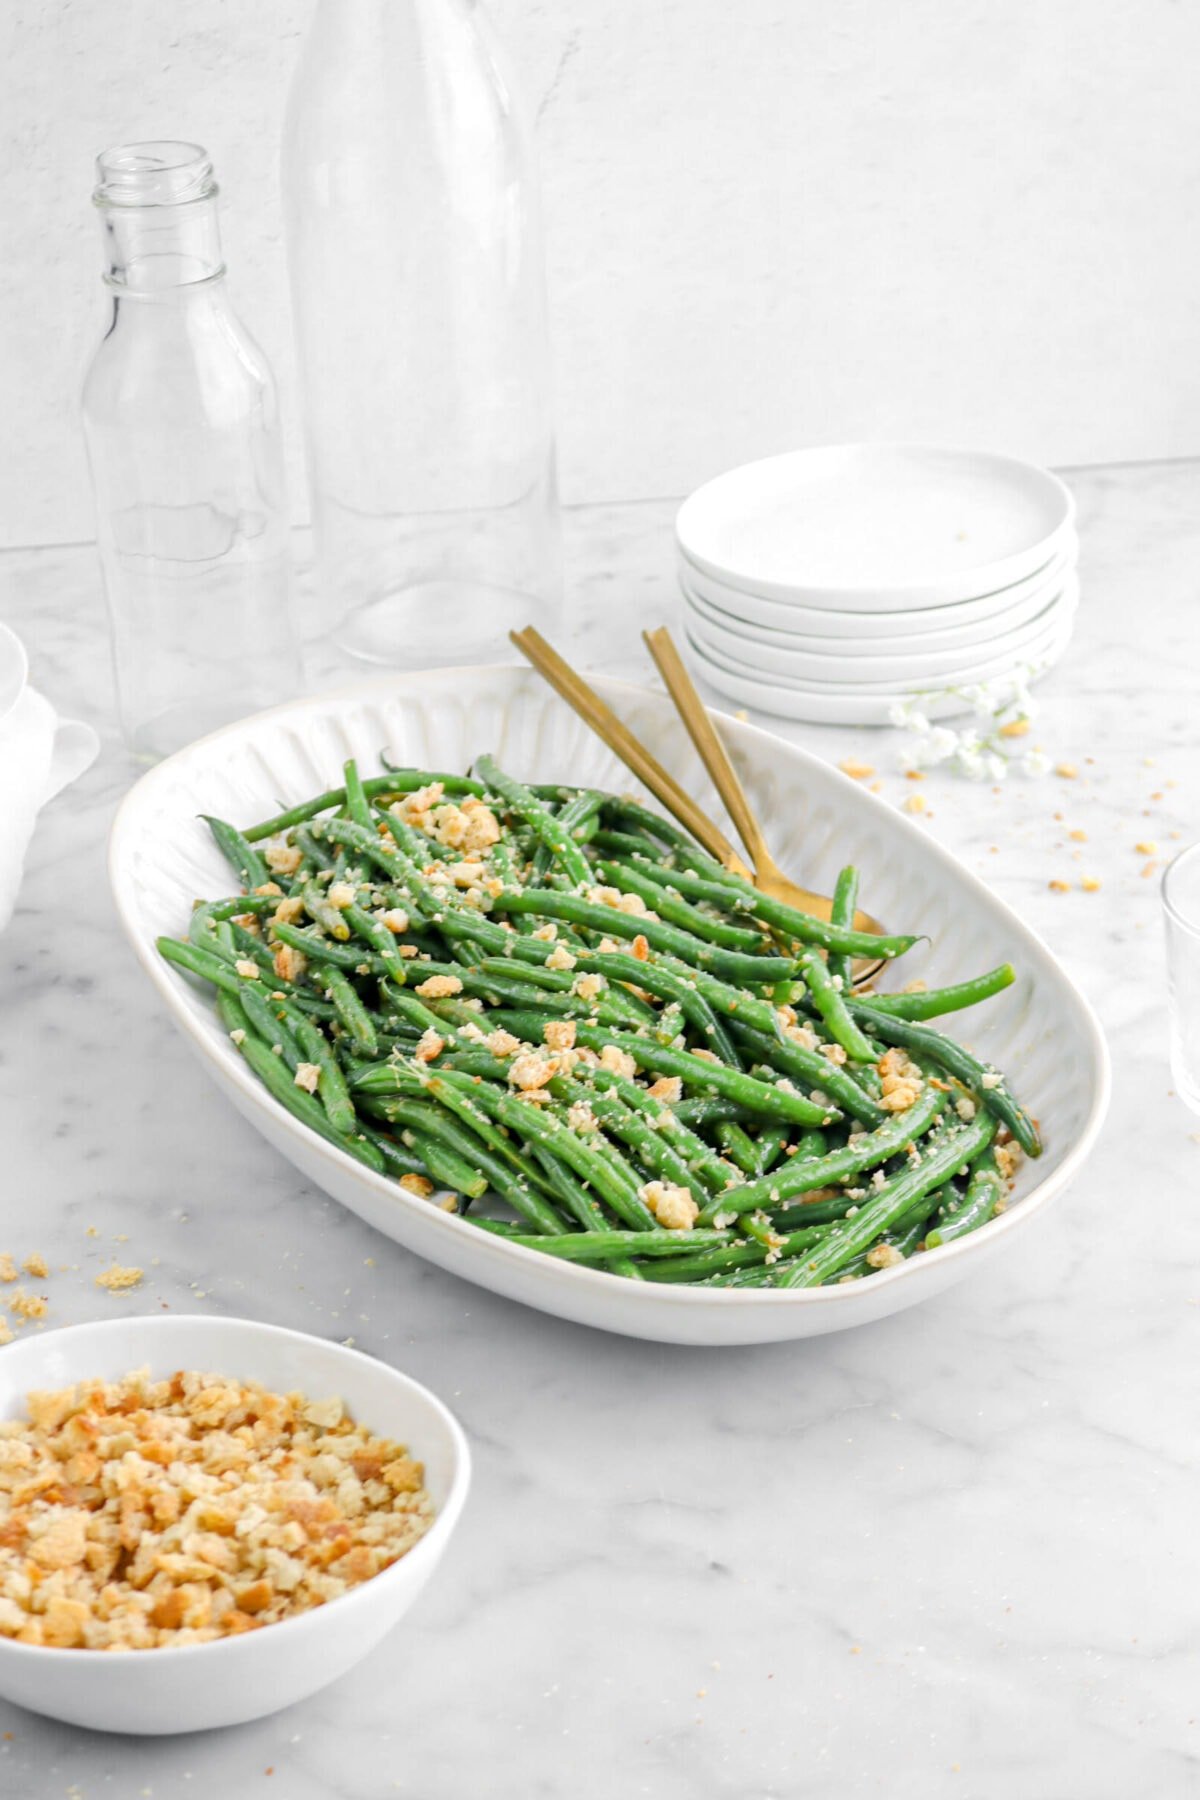 green beans in deep platter with bowl of bread crumbs beside, two empty glasses, and a stack of white plates behind.